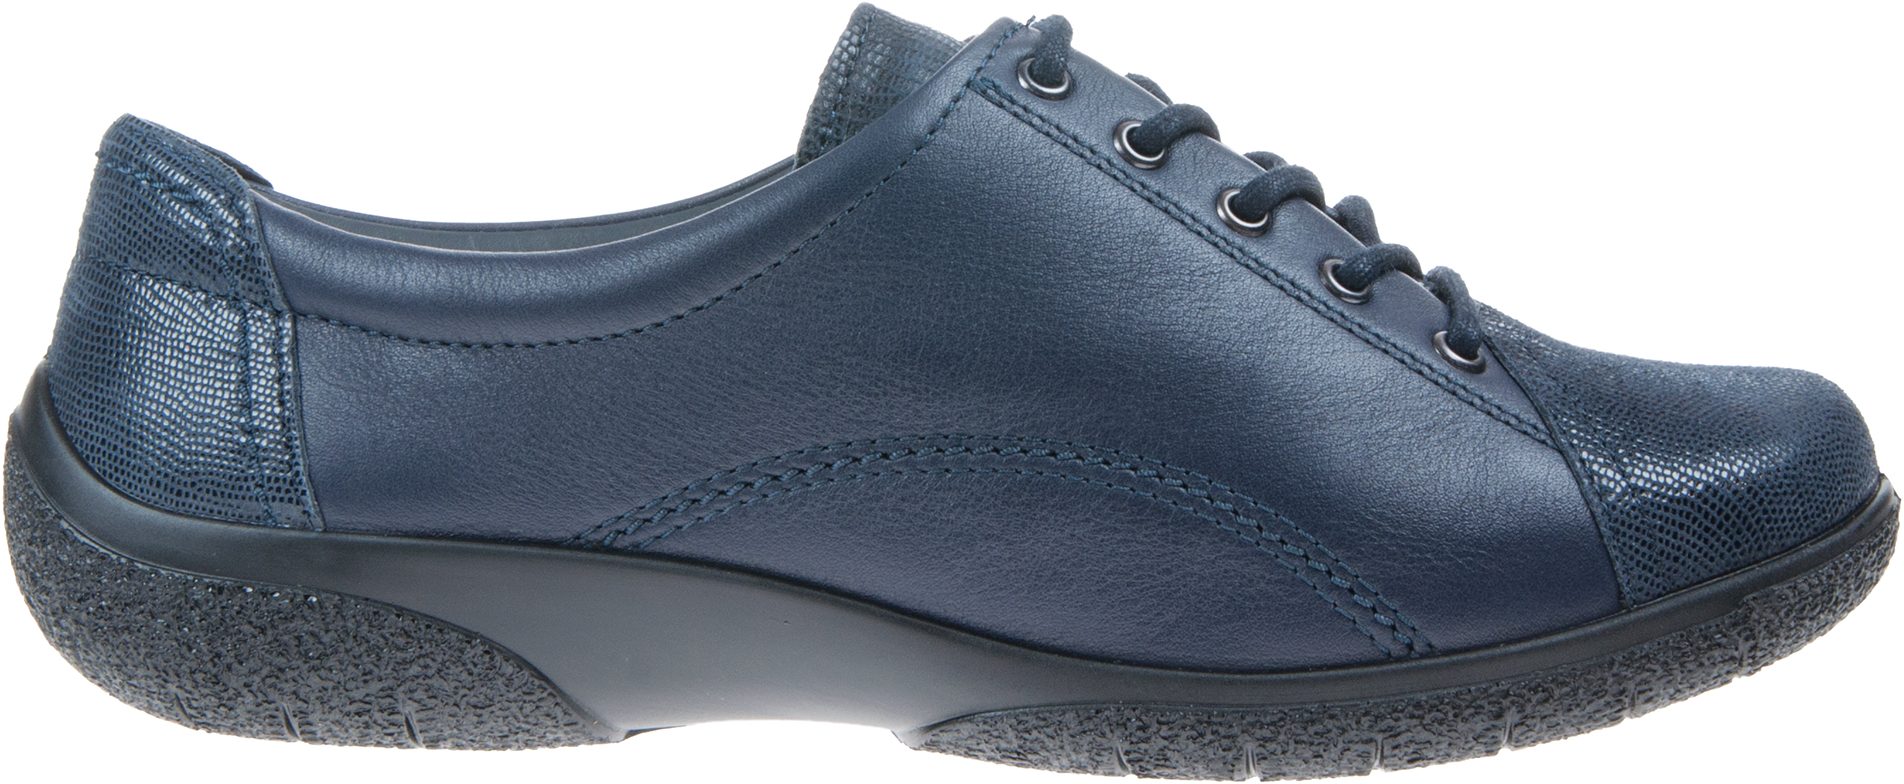 Hotter Dew Navy / Navy Snake - Everyday Shoes - Humphries Shoes